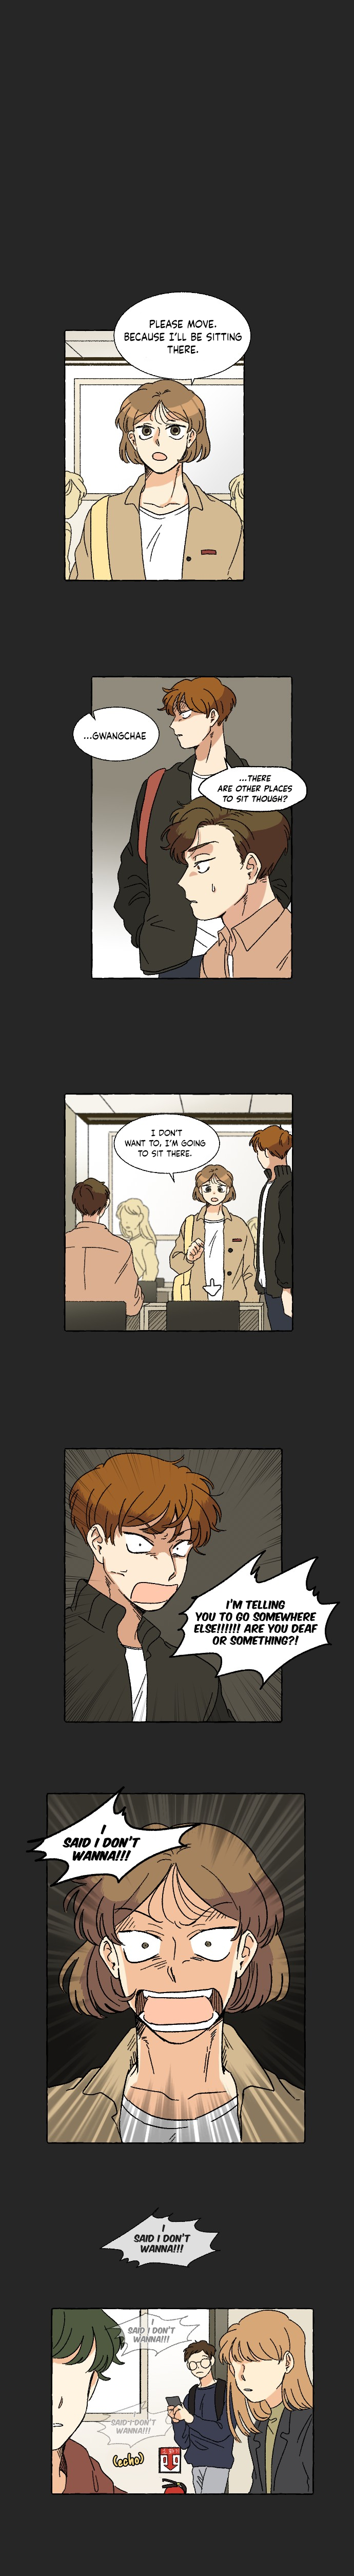 Daybreaking Romance - Page 2